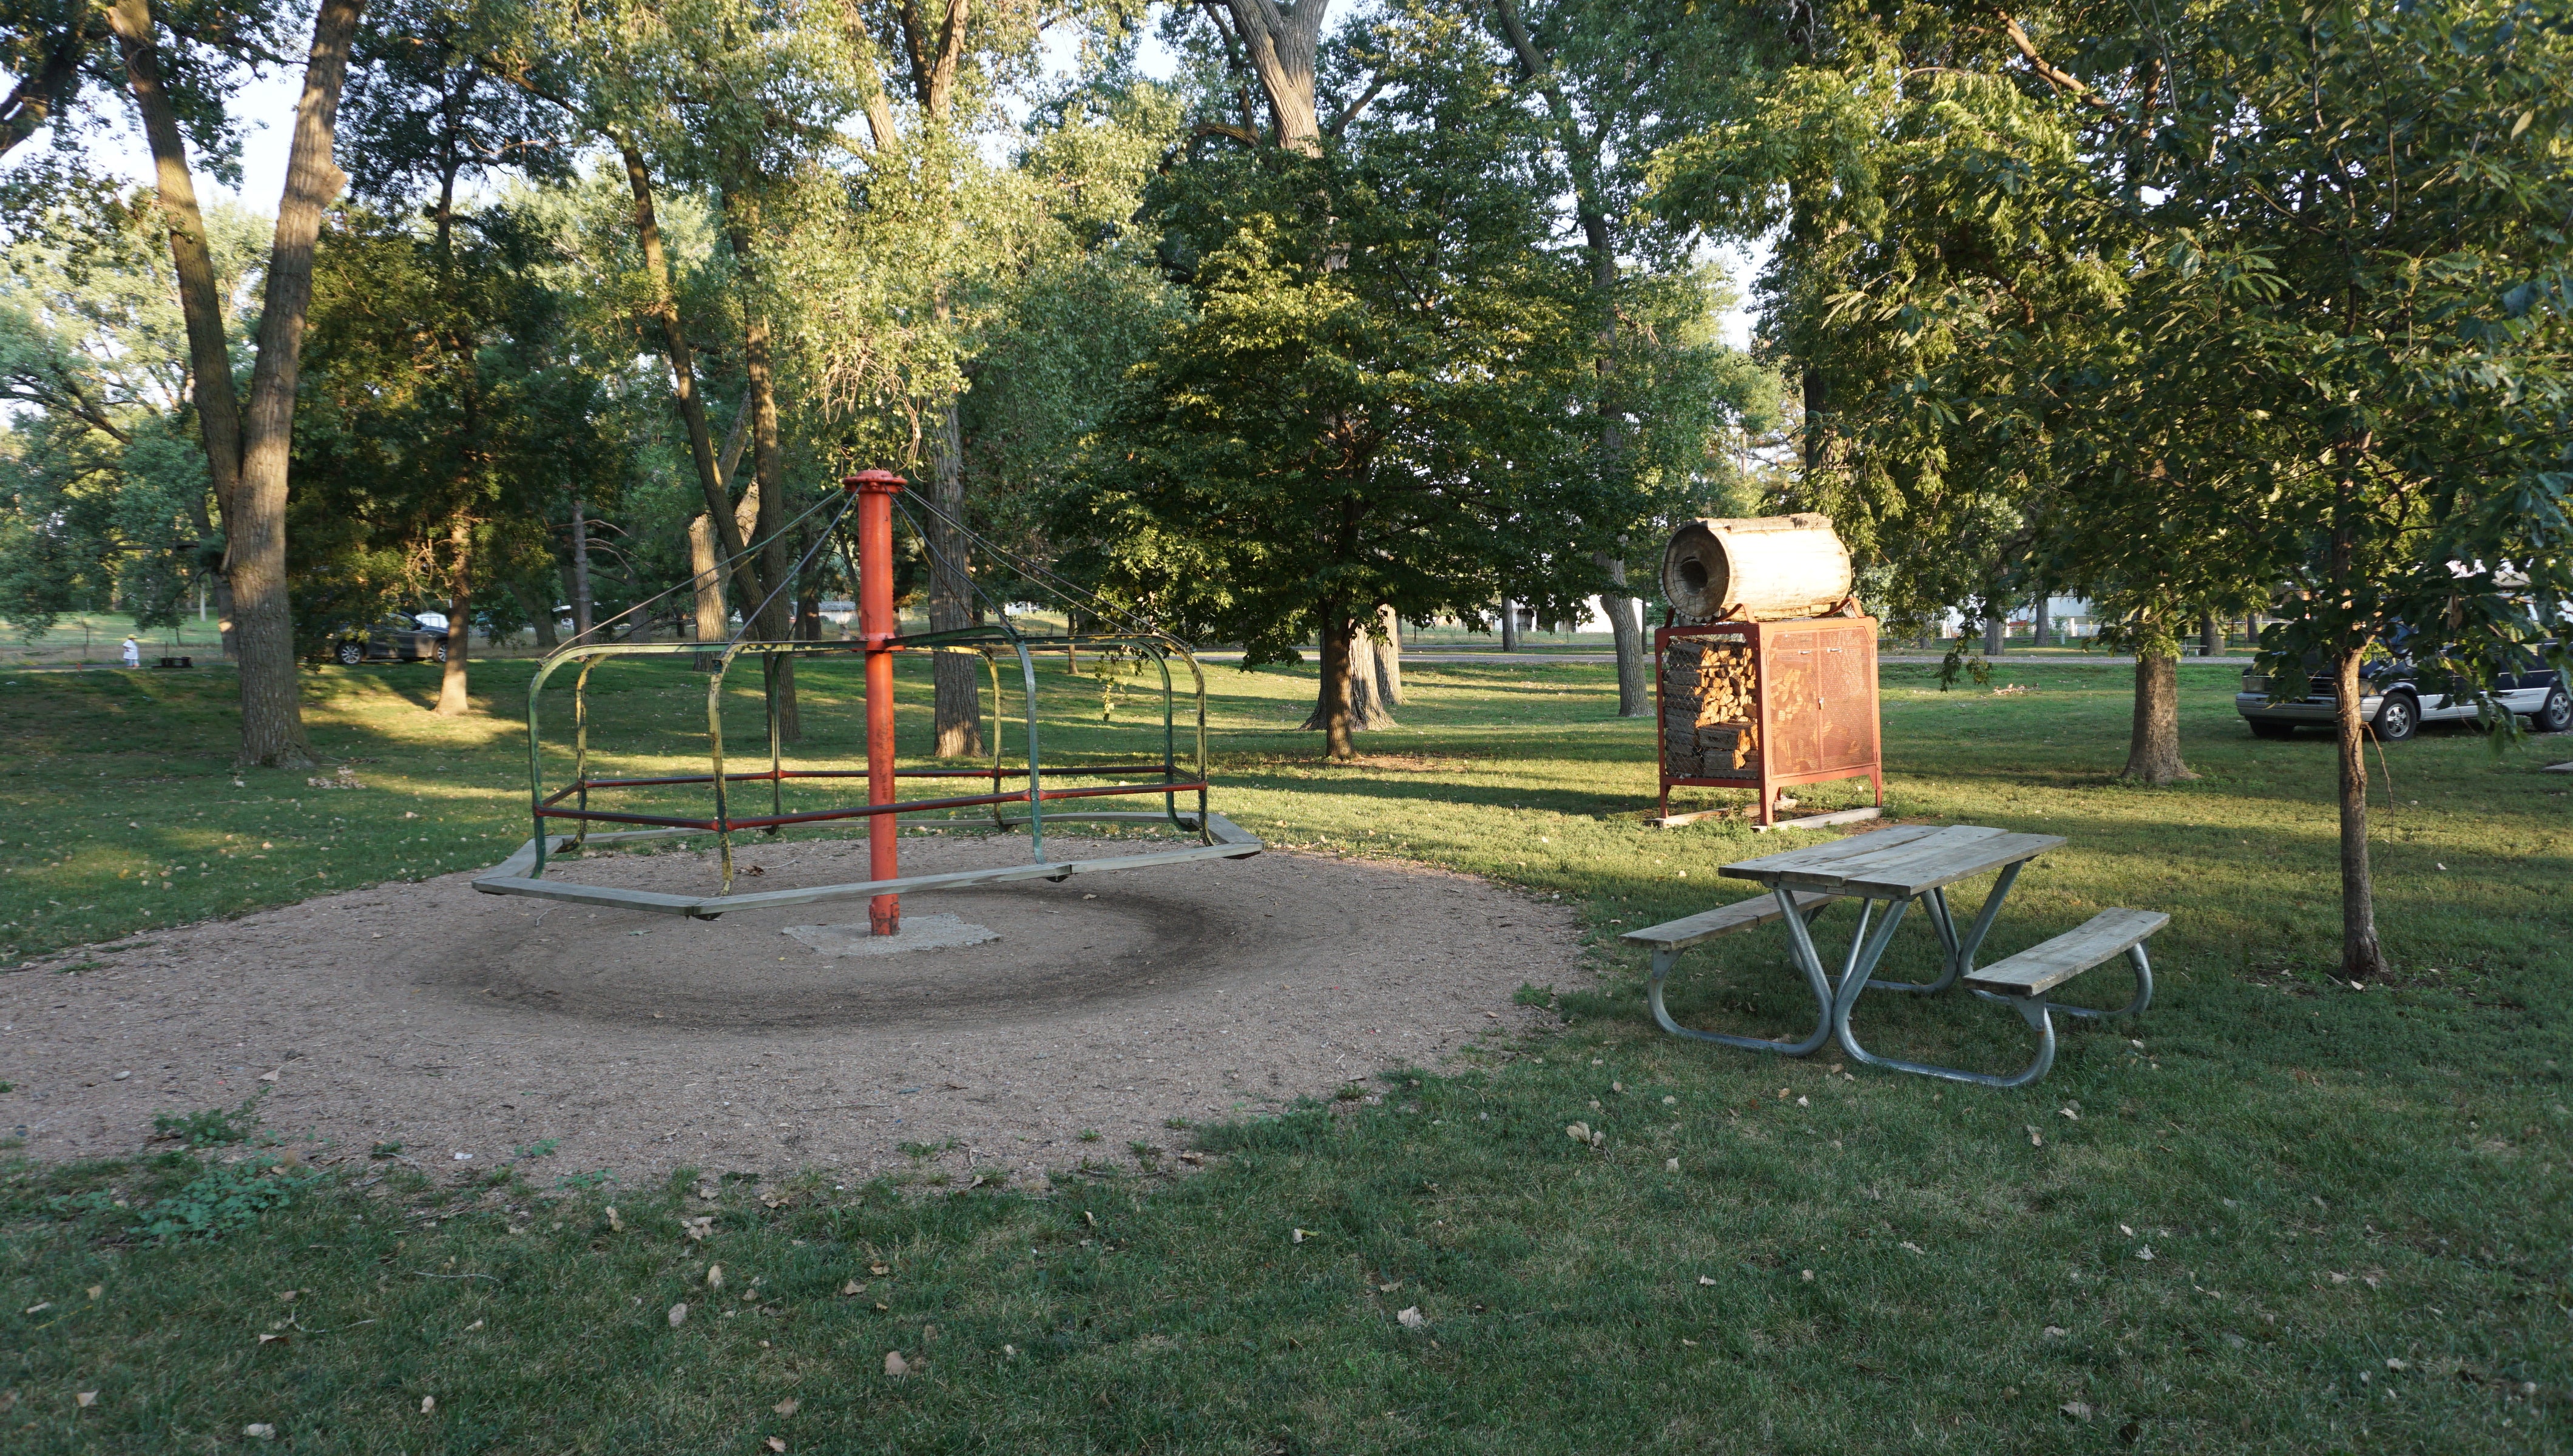 One of the playground areas in the park